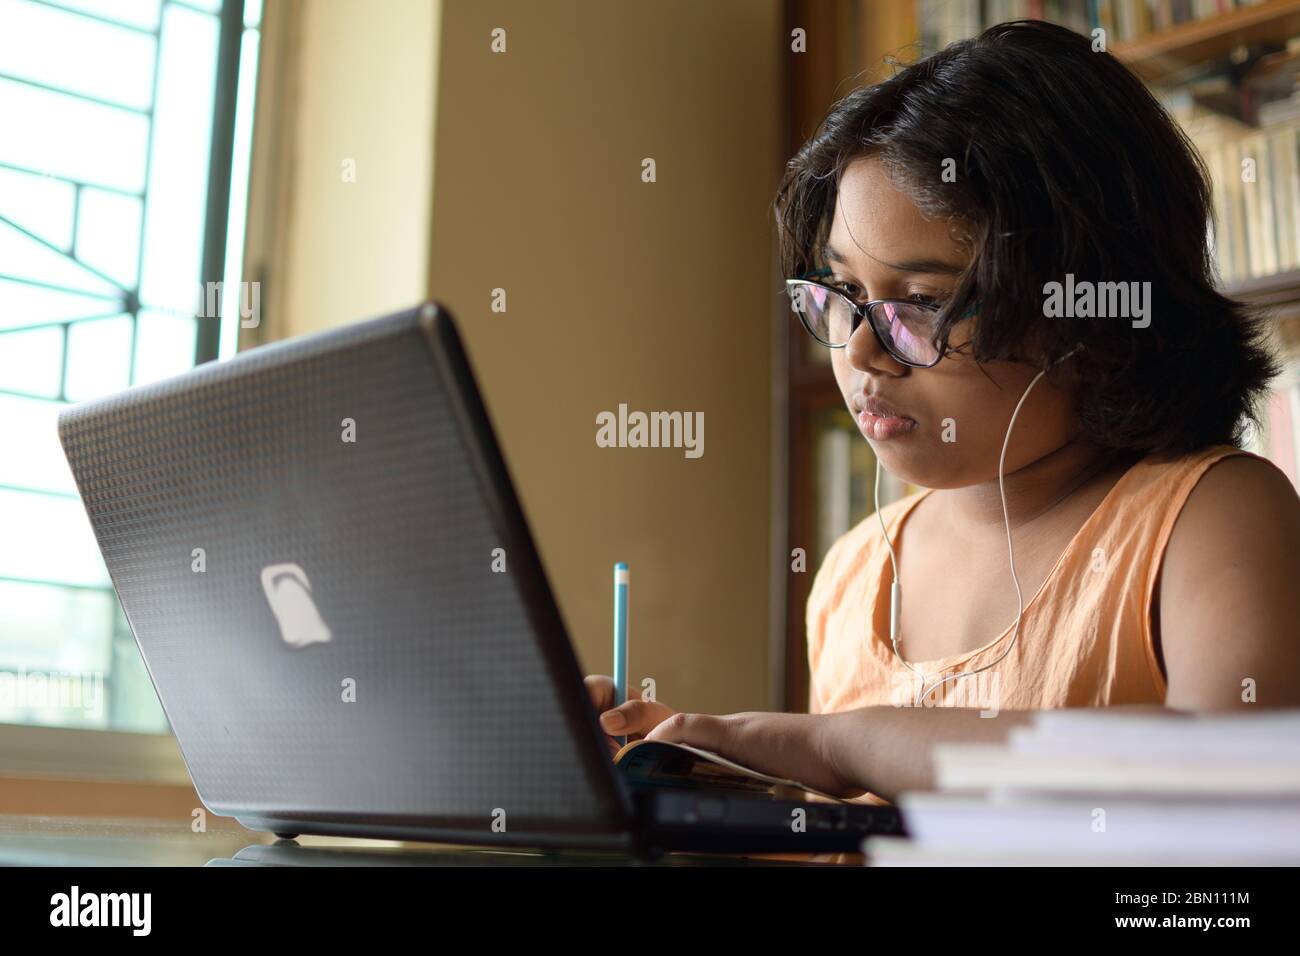 Indian School girl is attending her online class during her stay at home in lock down period due to Corona virus (COVID-19) pandemic. Stock Photo